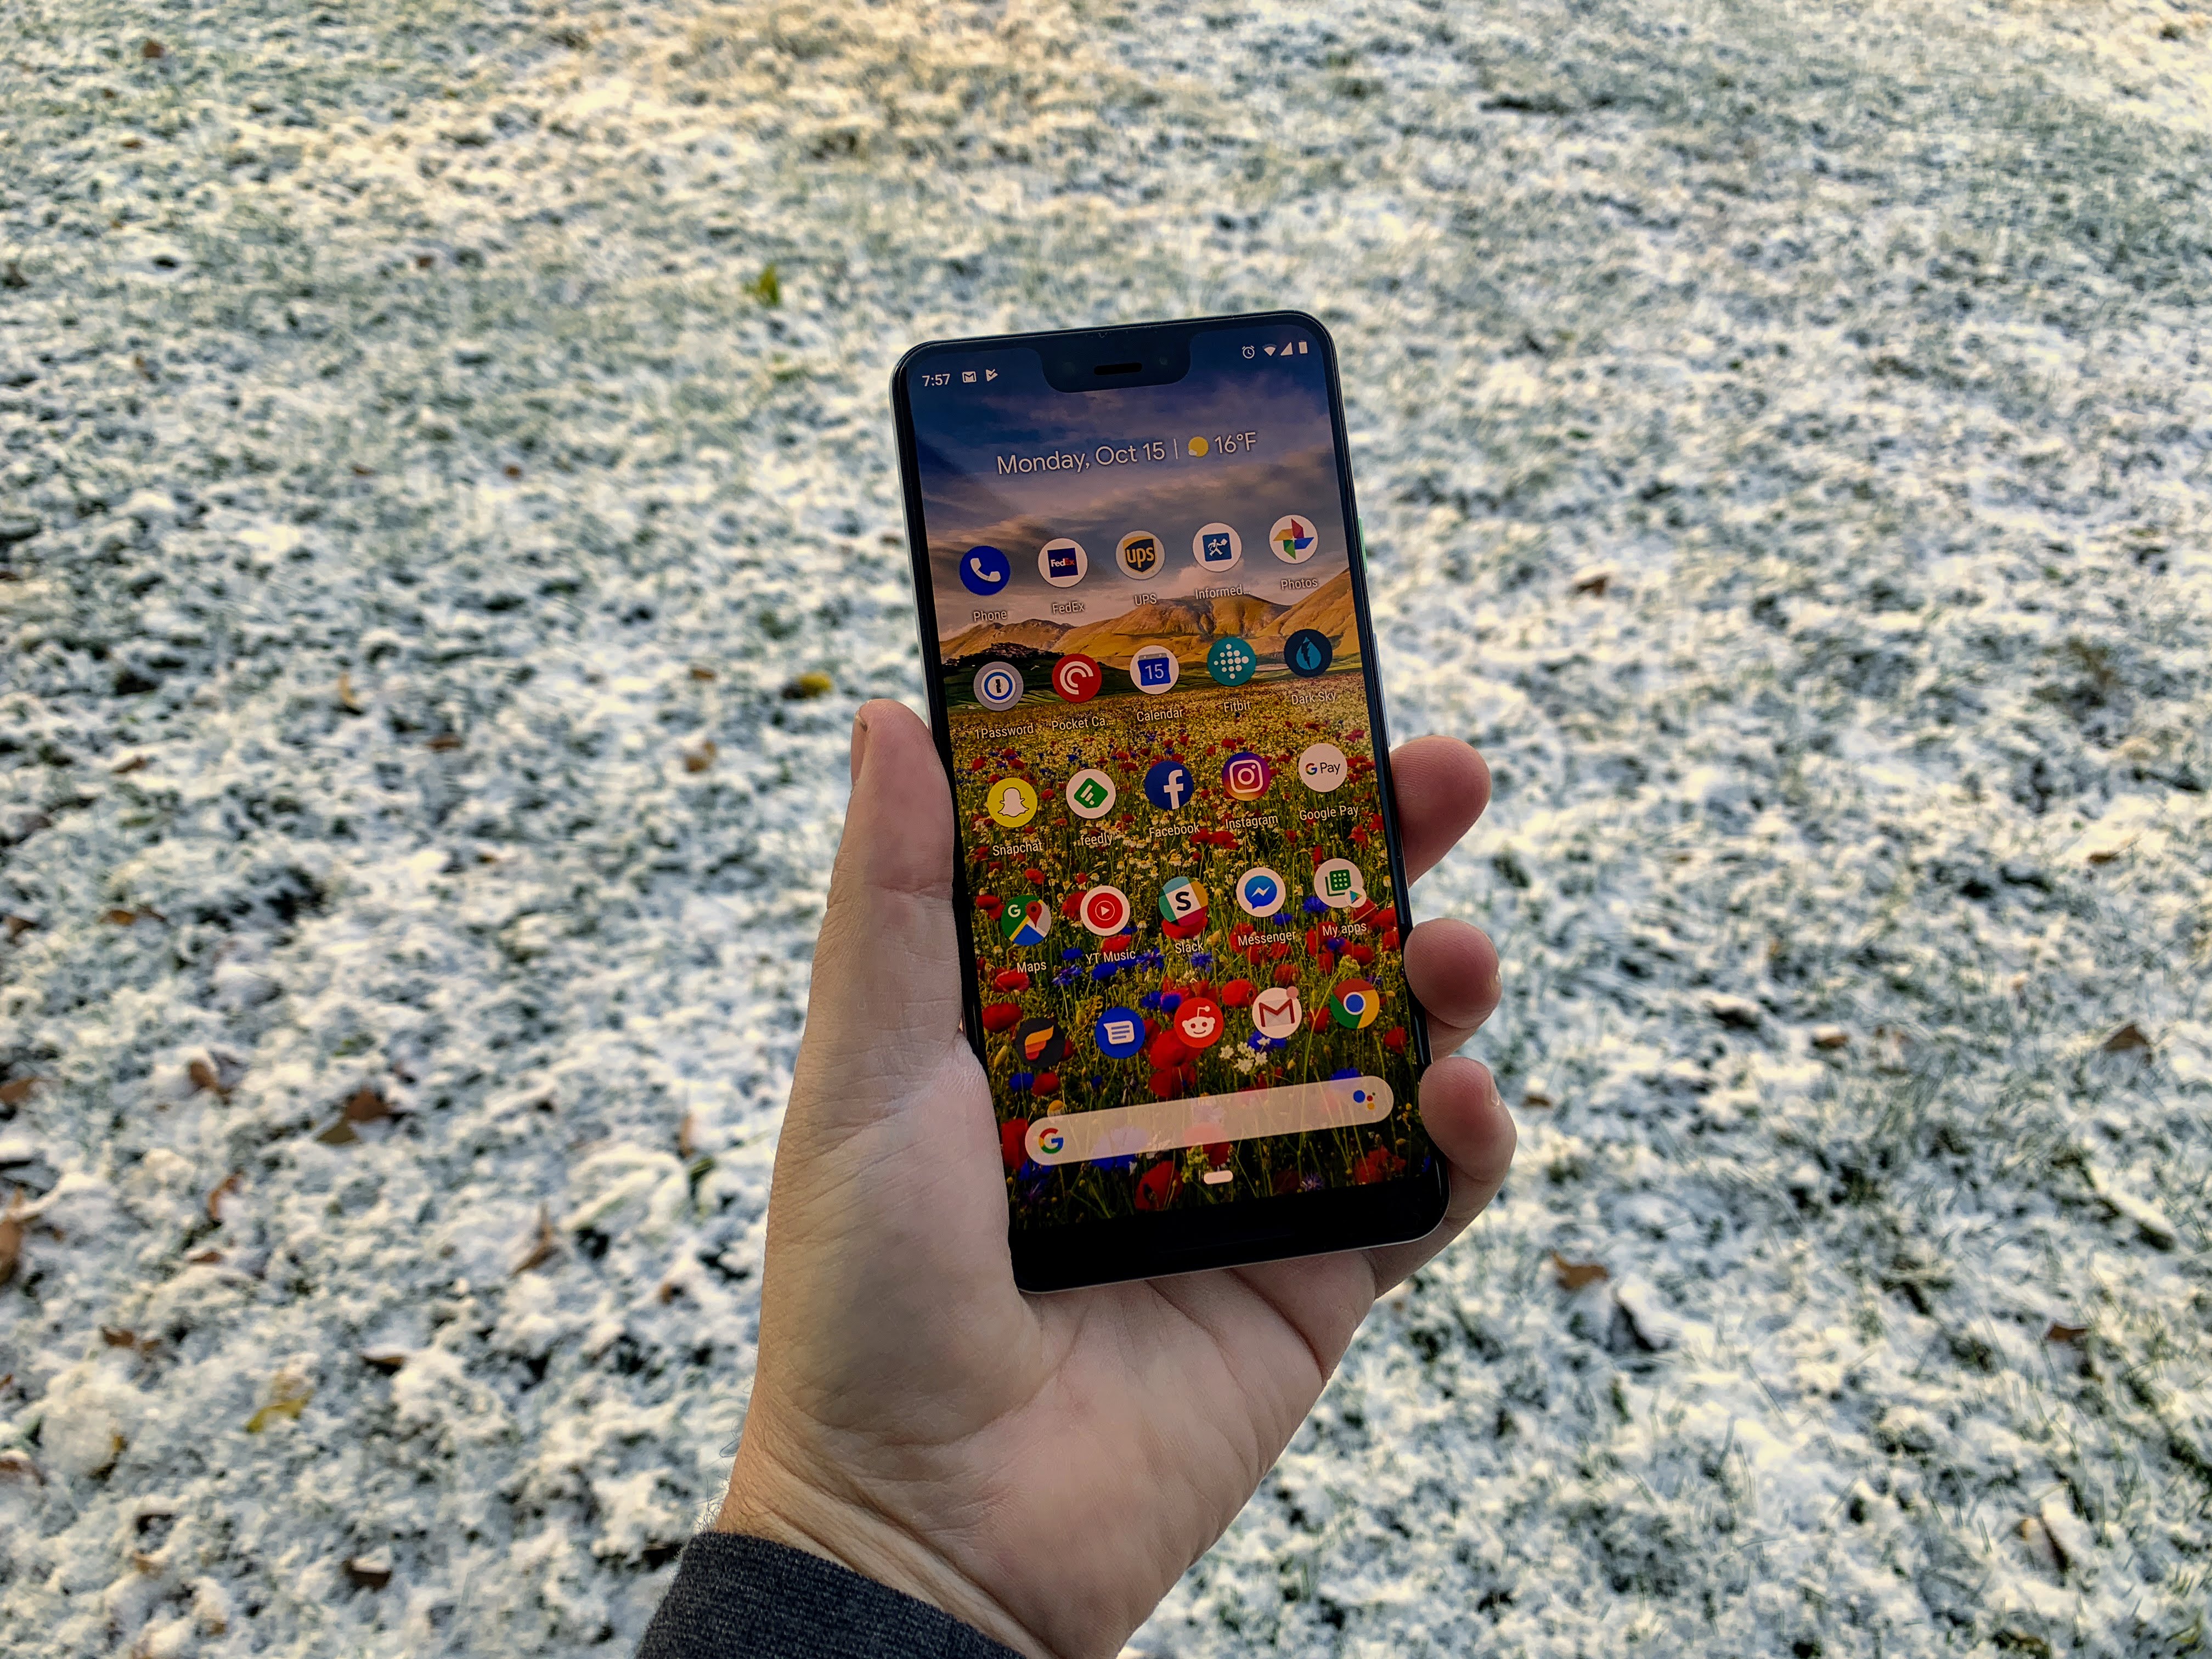 Google Pixel 2 XL review: A solid pure Android phone as one